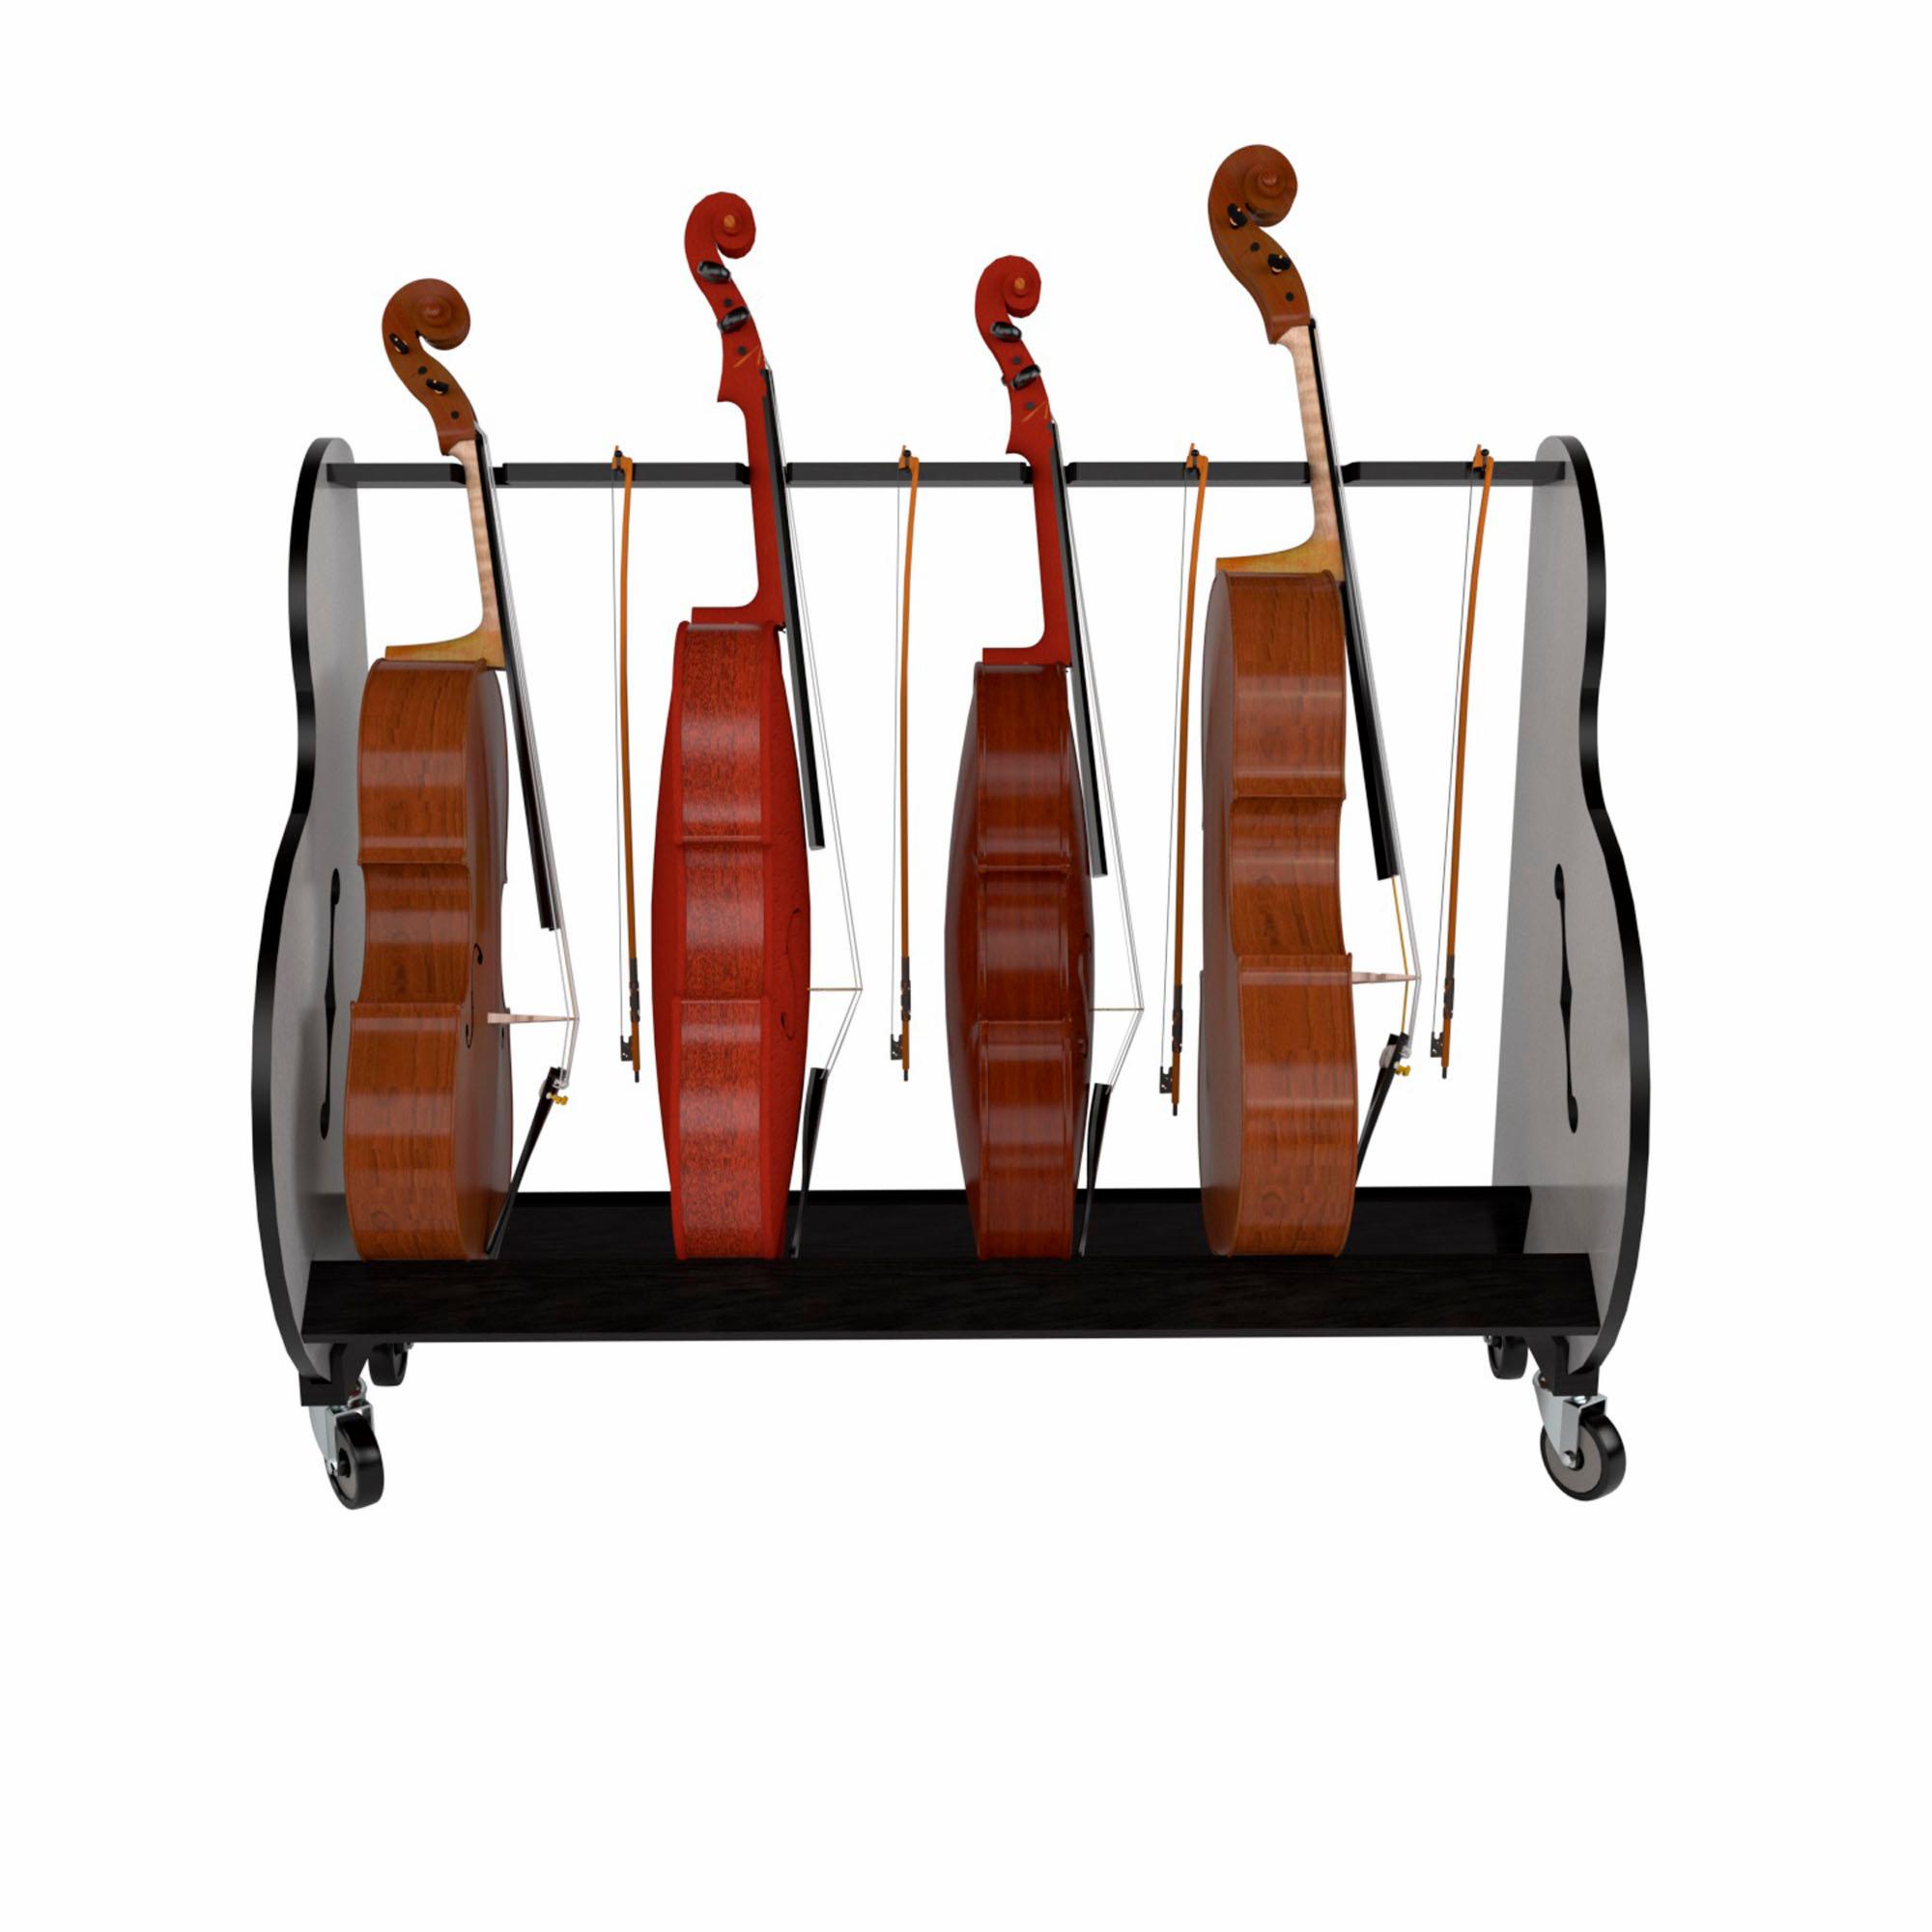 A&S Crafted Products Band Room Cello Rack Instrument Stand